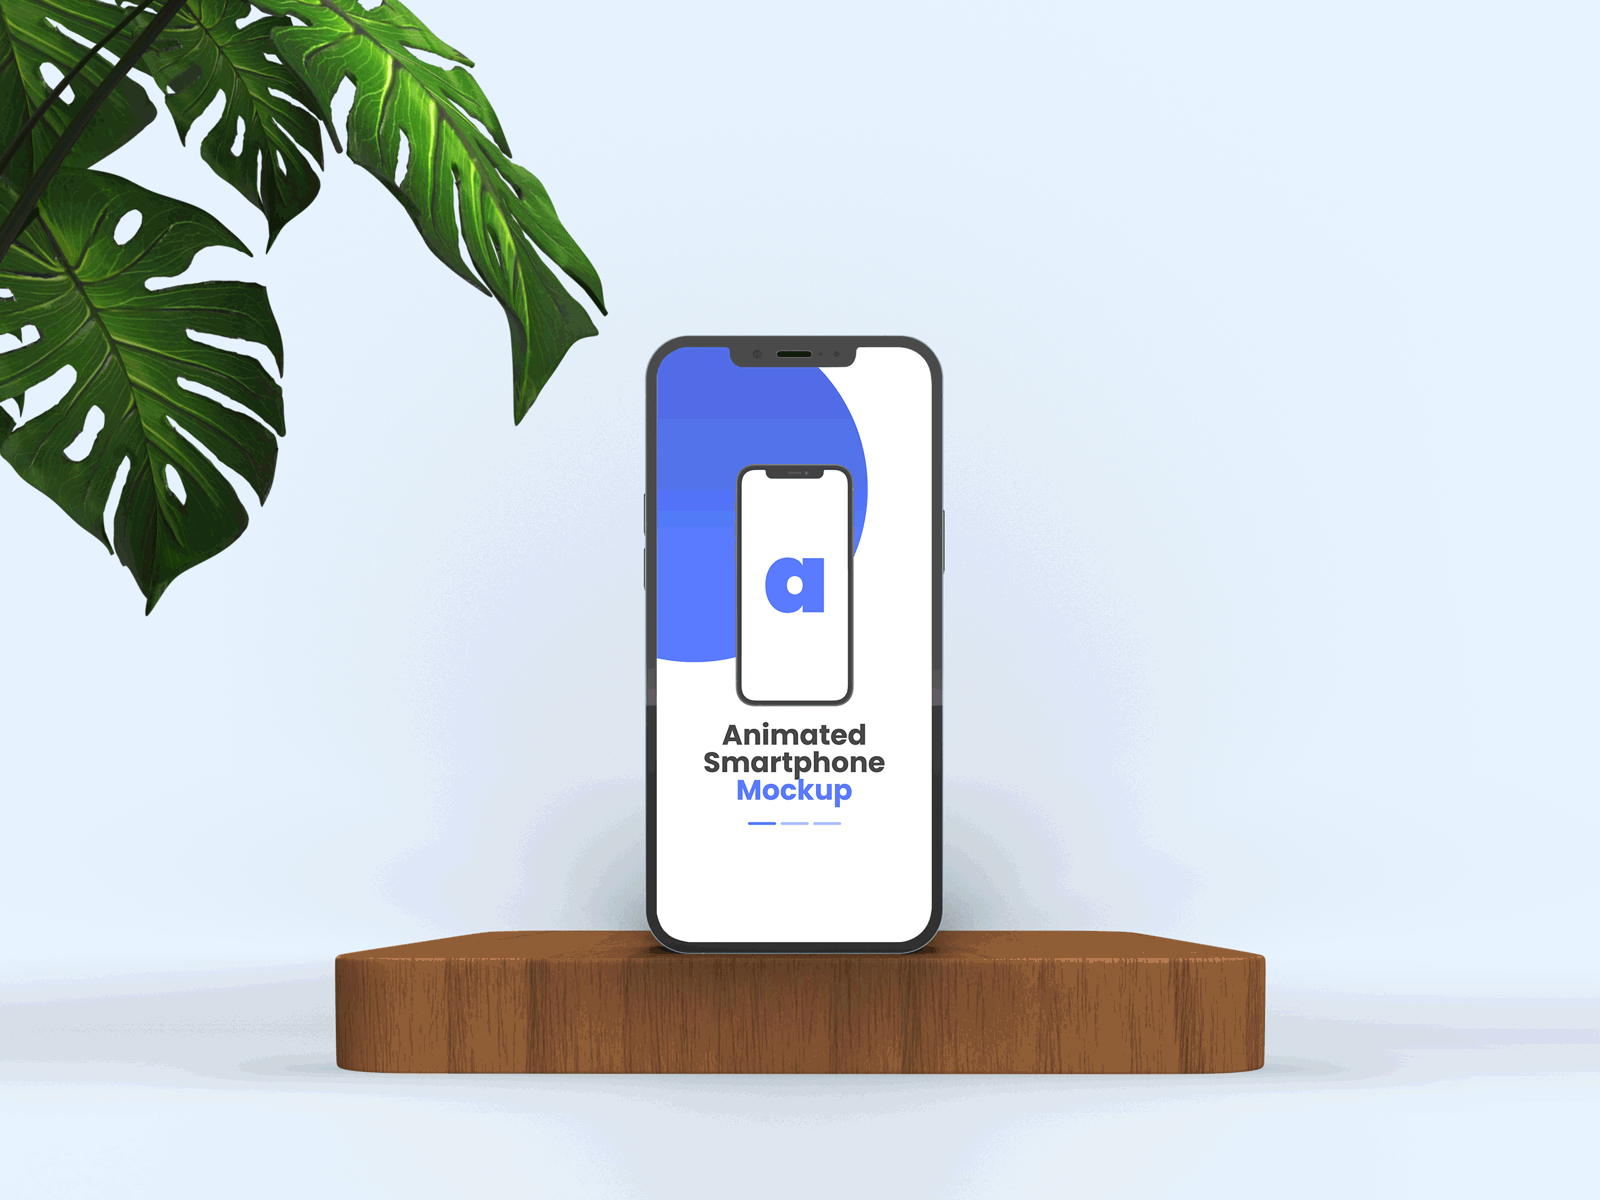 Animated iPhone 12 Pro Max Premium Mockup animated animated iphone mockup animated smartphone mockup app clean display iphone iphone 12 pro max iphone mockup mockup mockup psd mockups photo realistic presentation preview pro max professional promotion psd screen